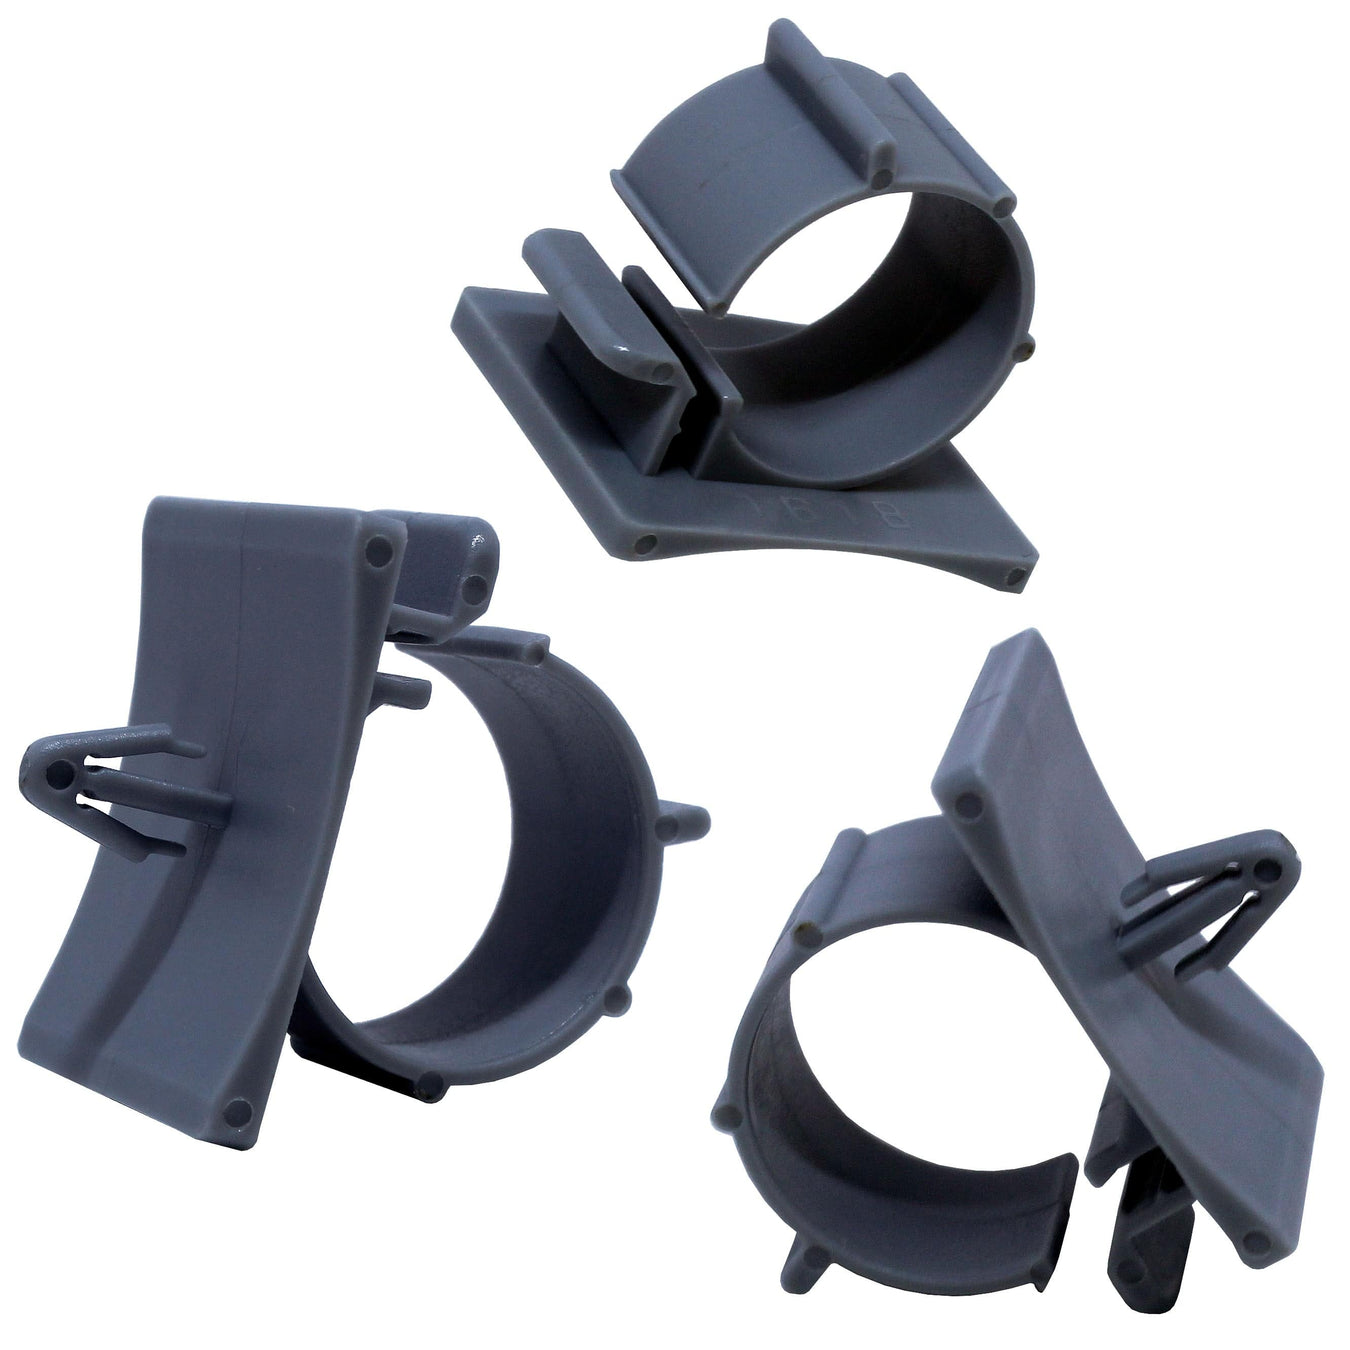 Push Mount Clamps